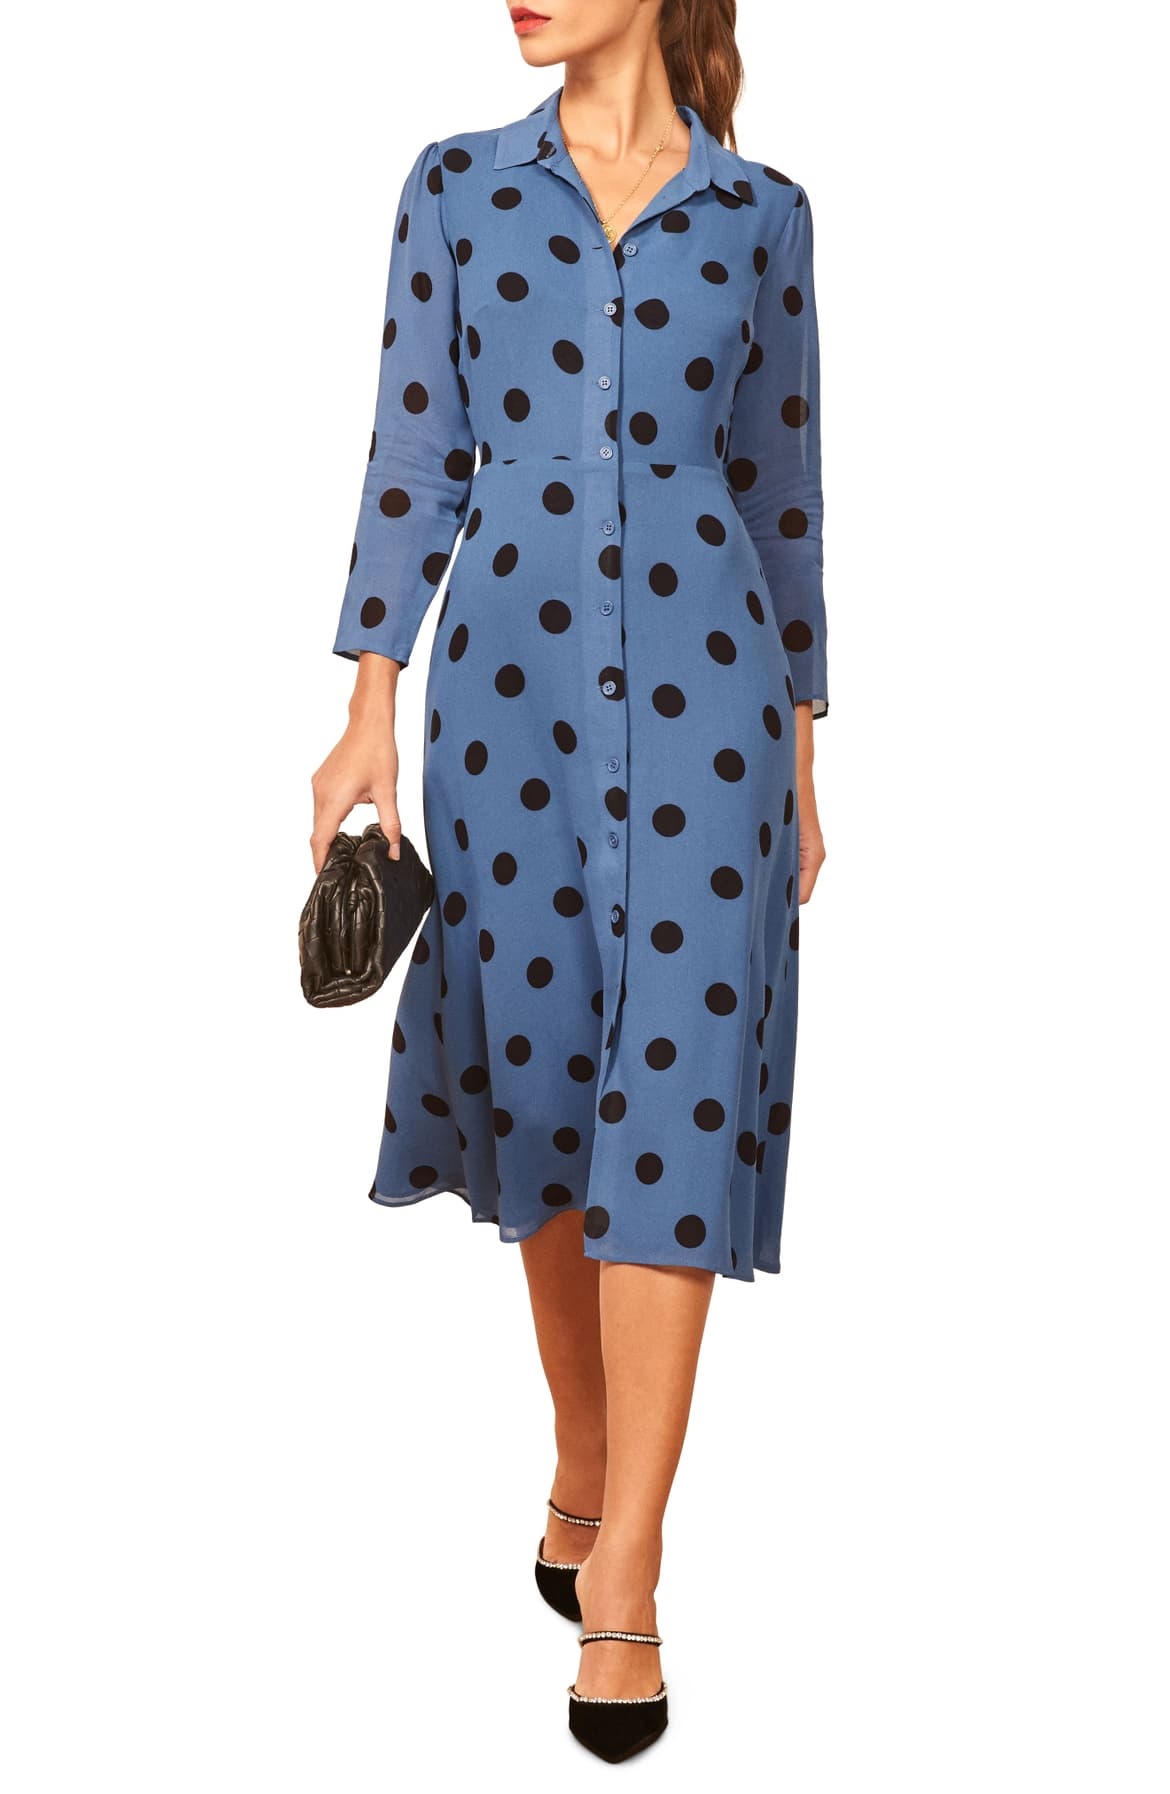 reformation shirt dress with polka dots for the nordstrom winter sale